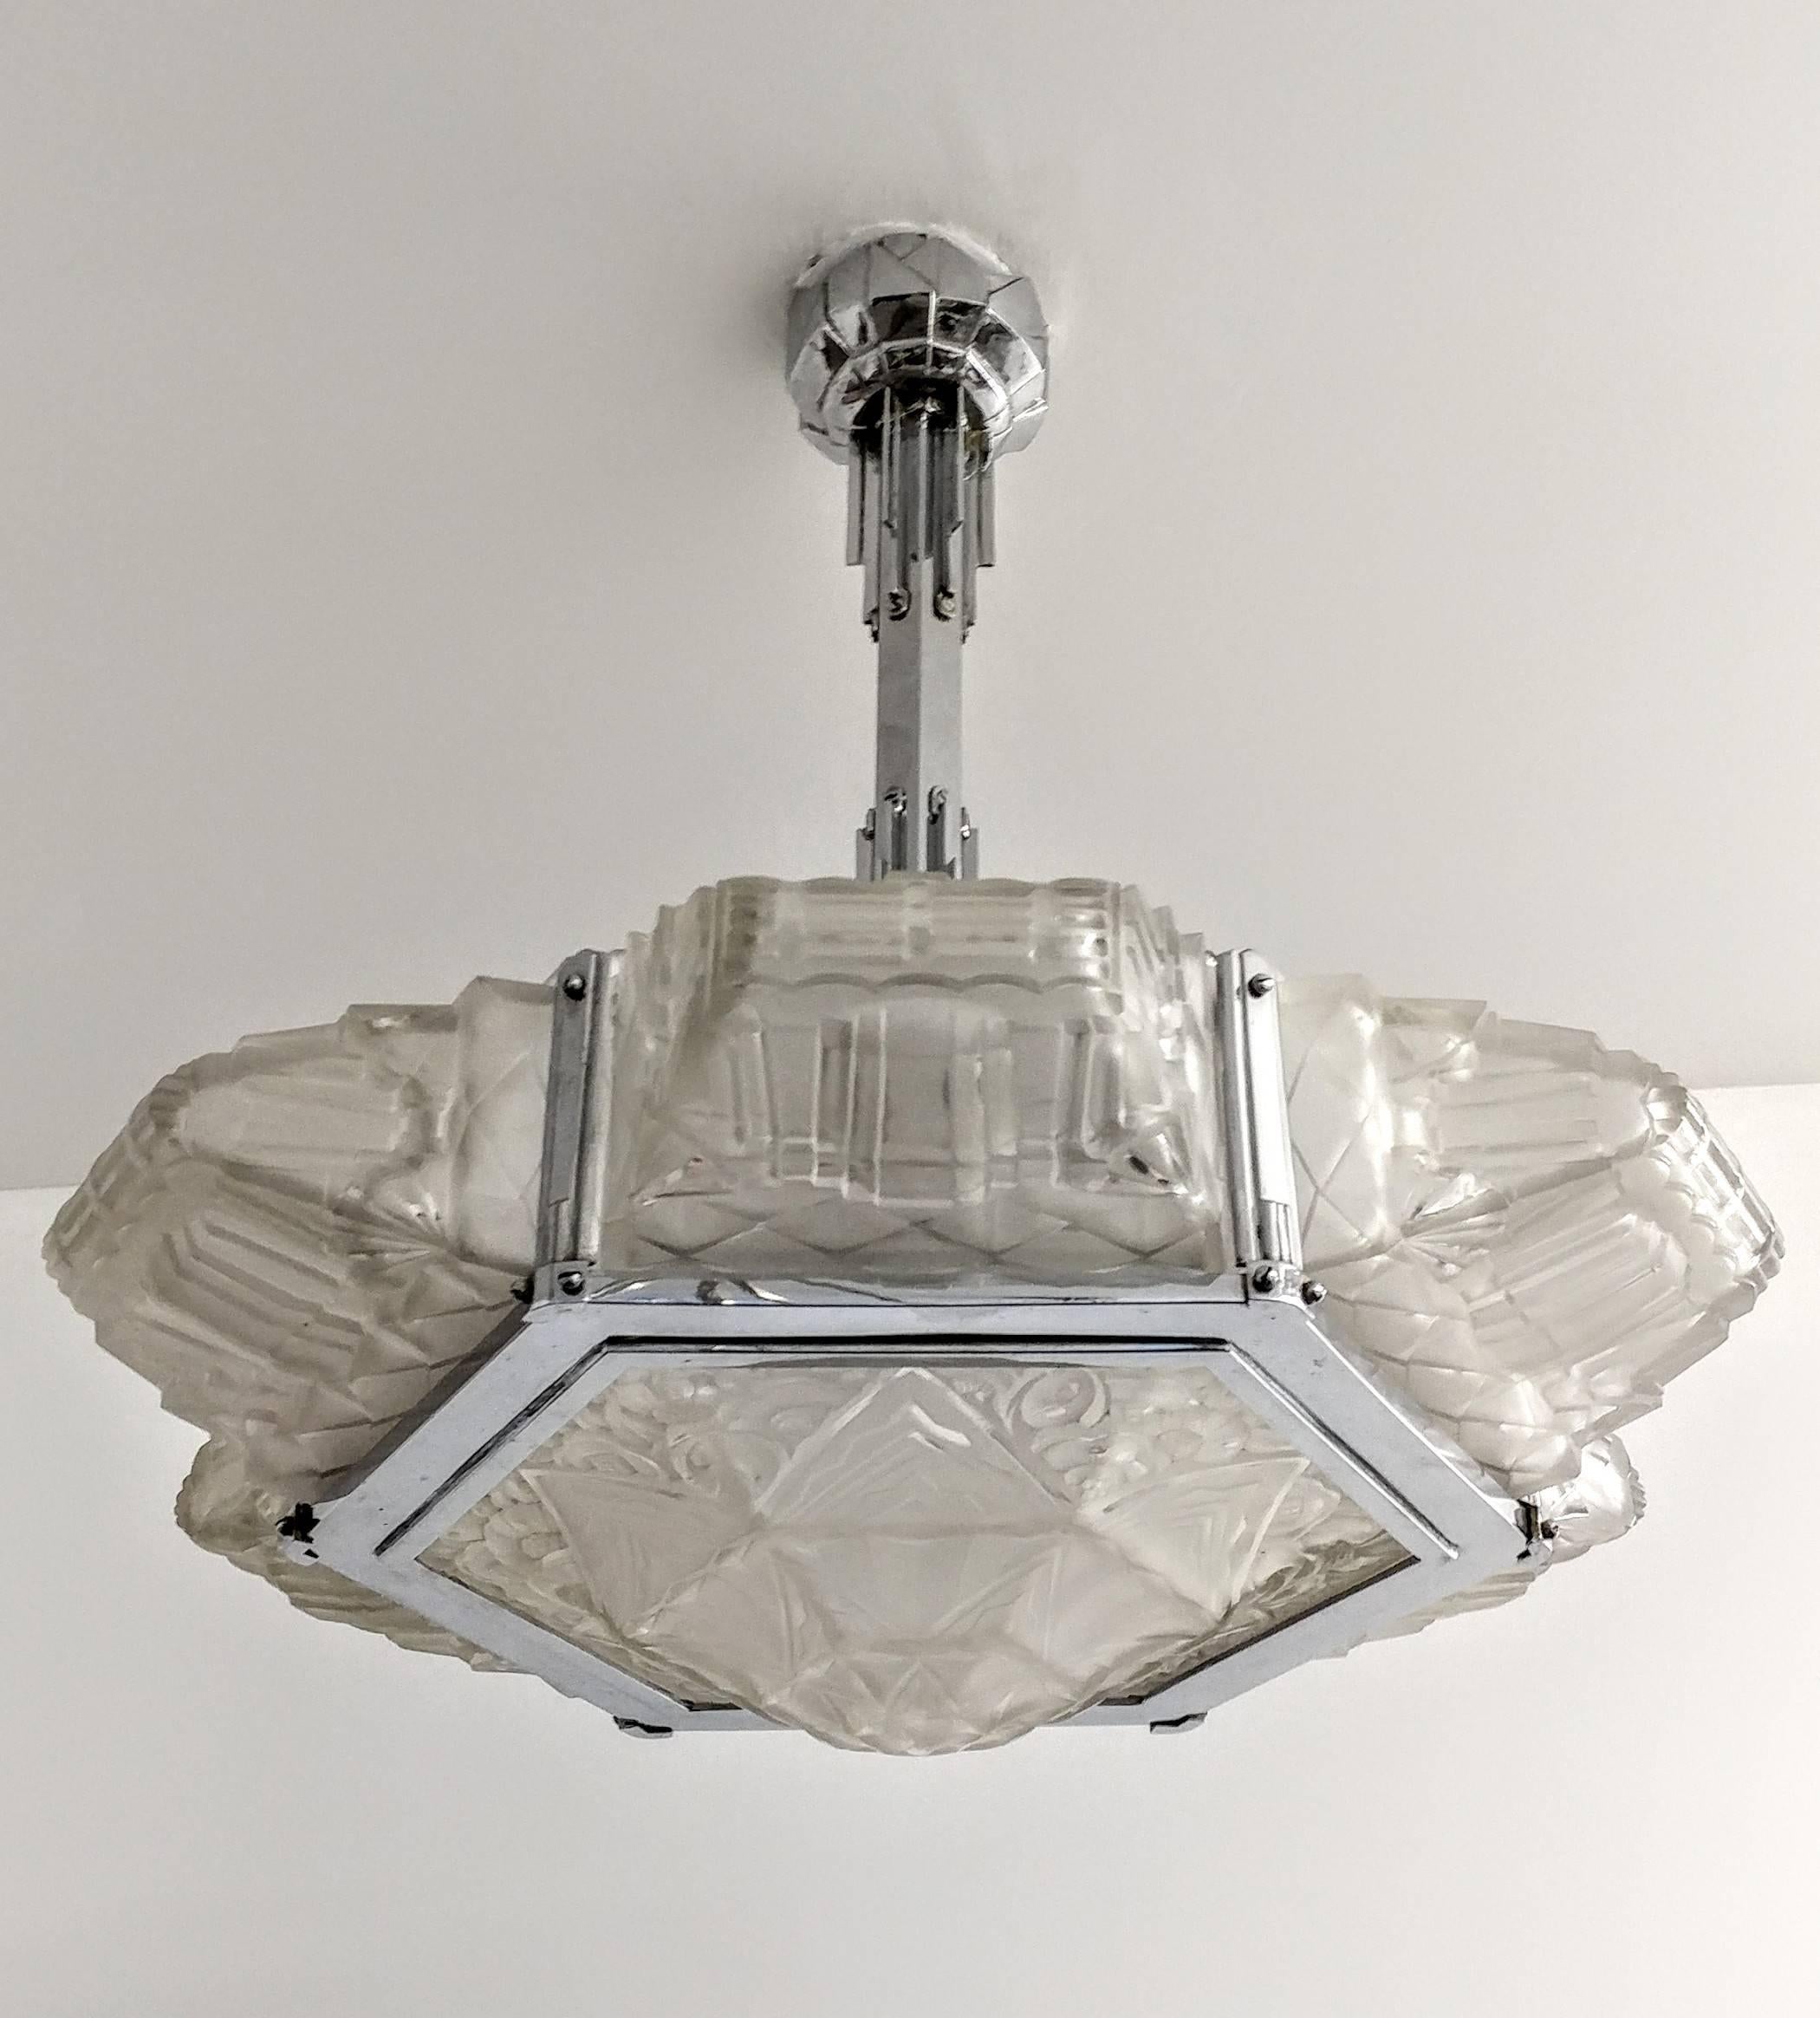 A gorgeous French Art Deco chandelier by the French artist 